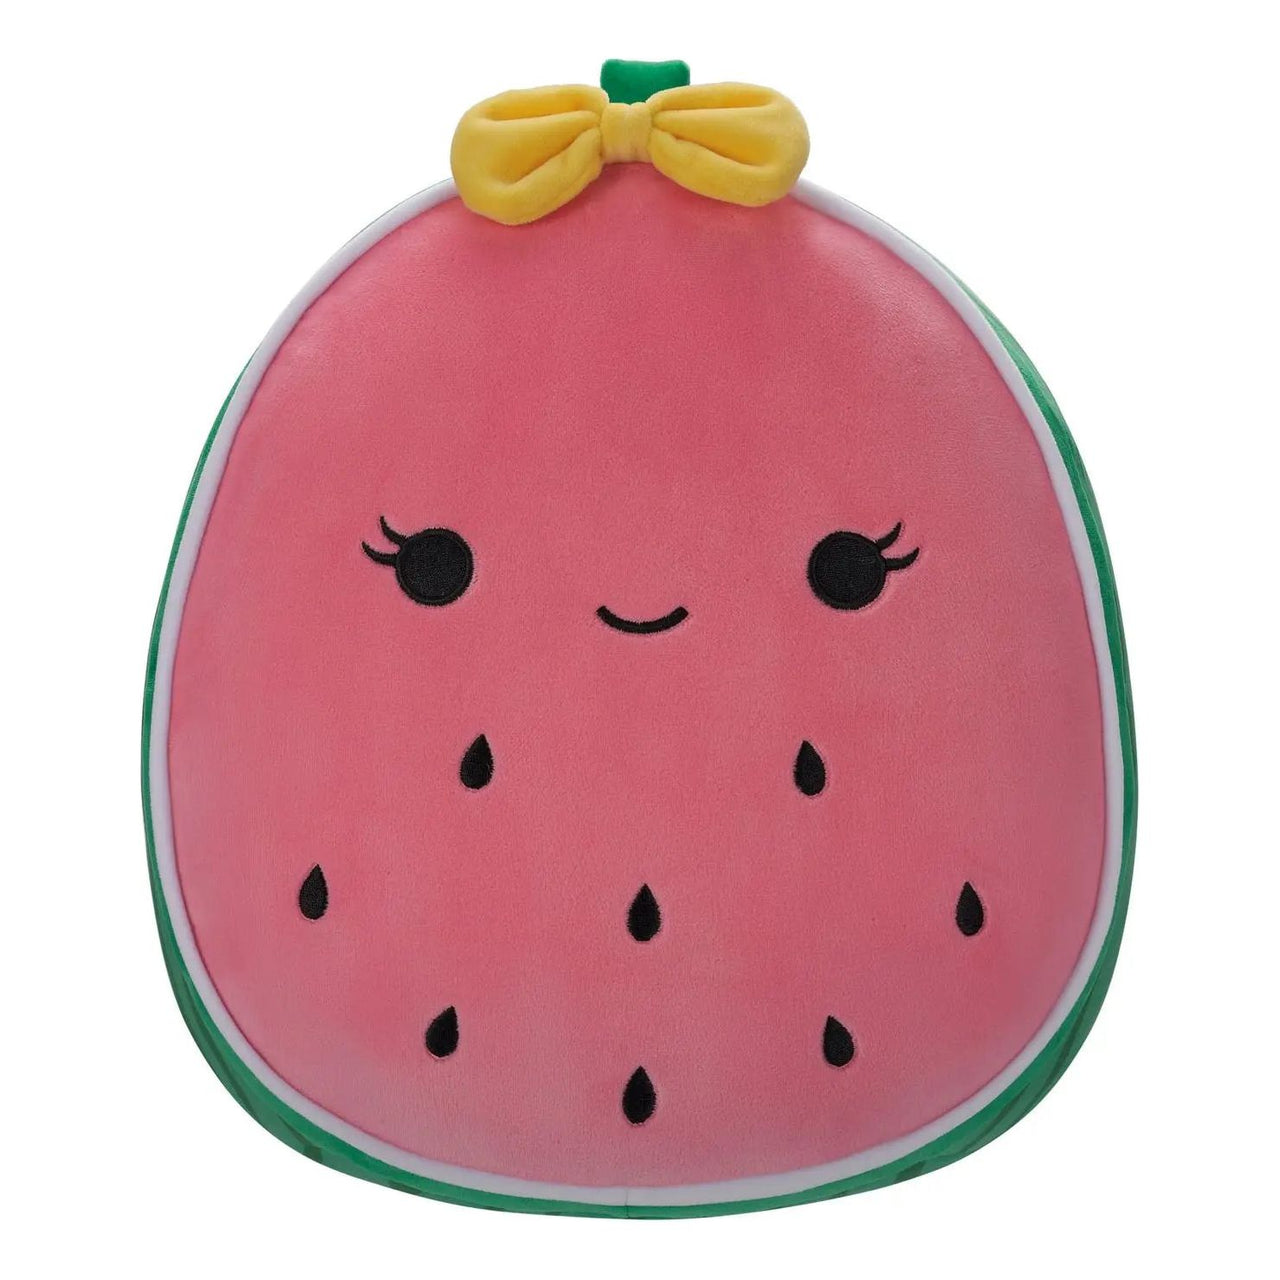 Squishmallows 12" Wanda the Pink Watermelon with Seeds Plush Squishmallows